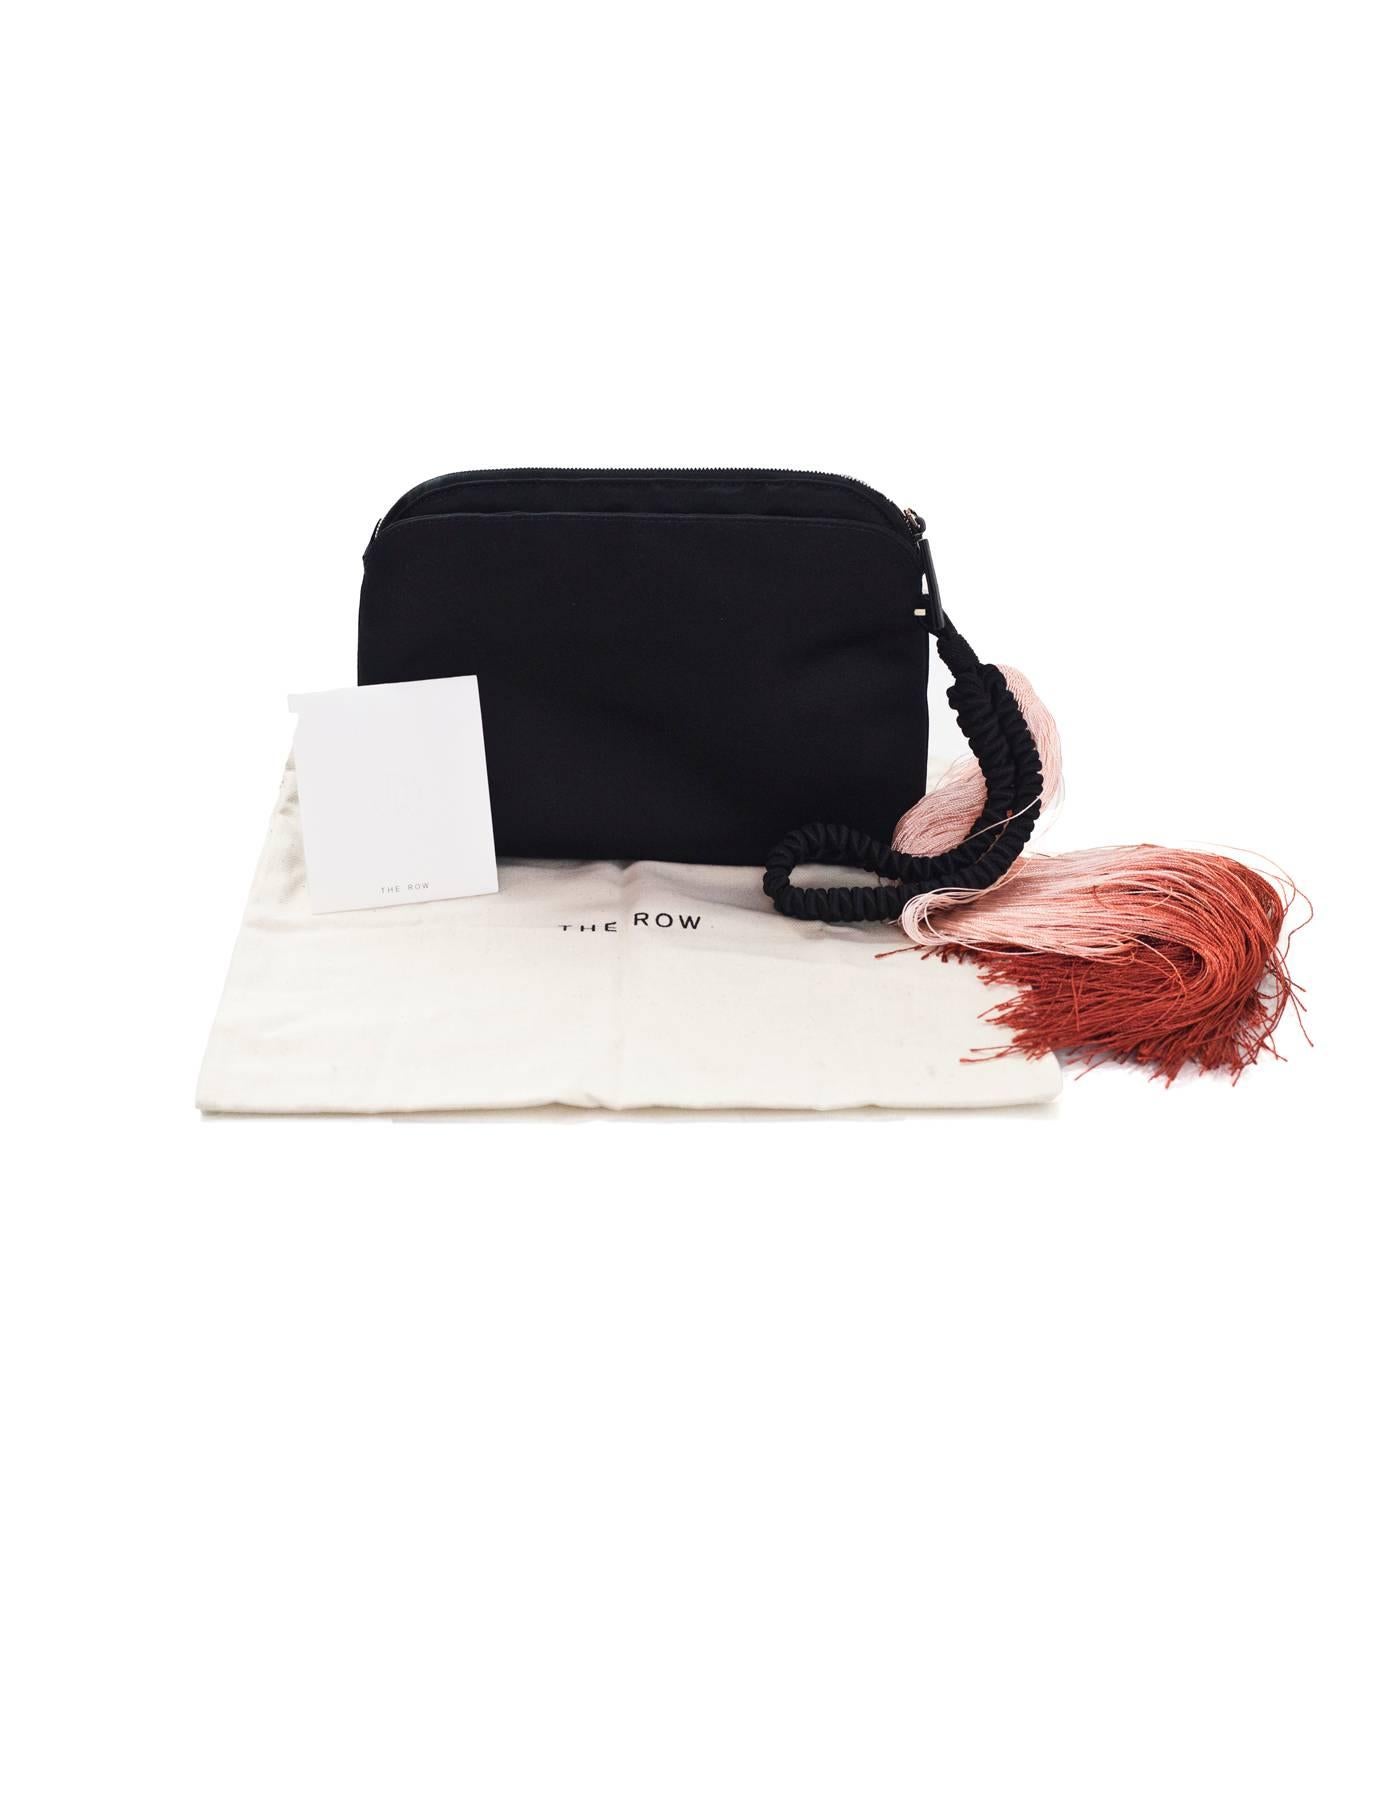 The Row Black Satin and Ombre Tassel Clutch Bag rt. $1, 850 1